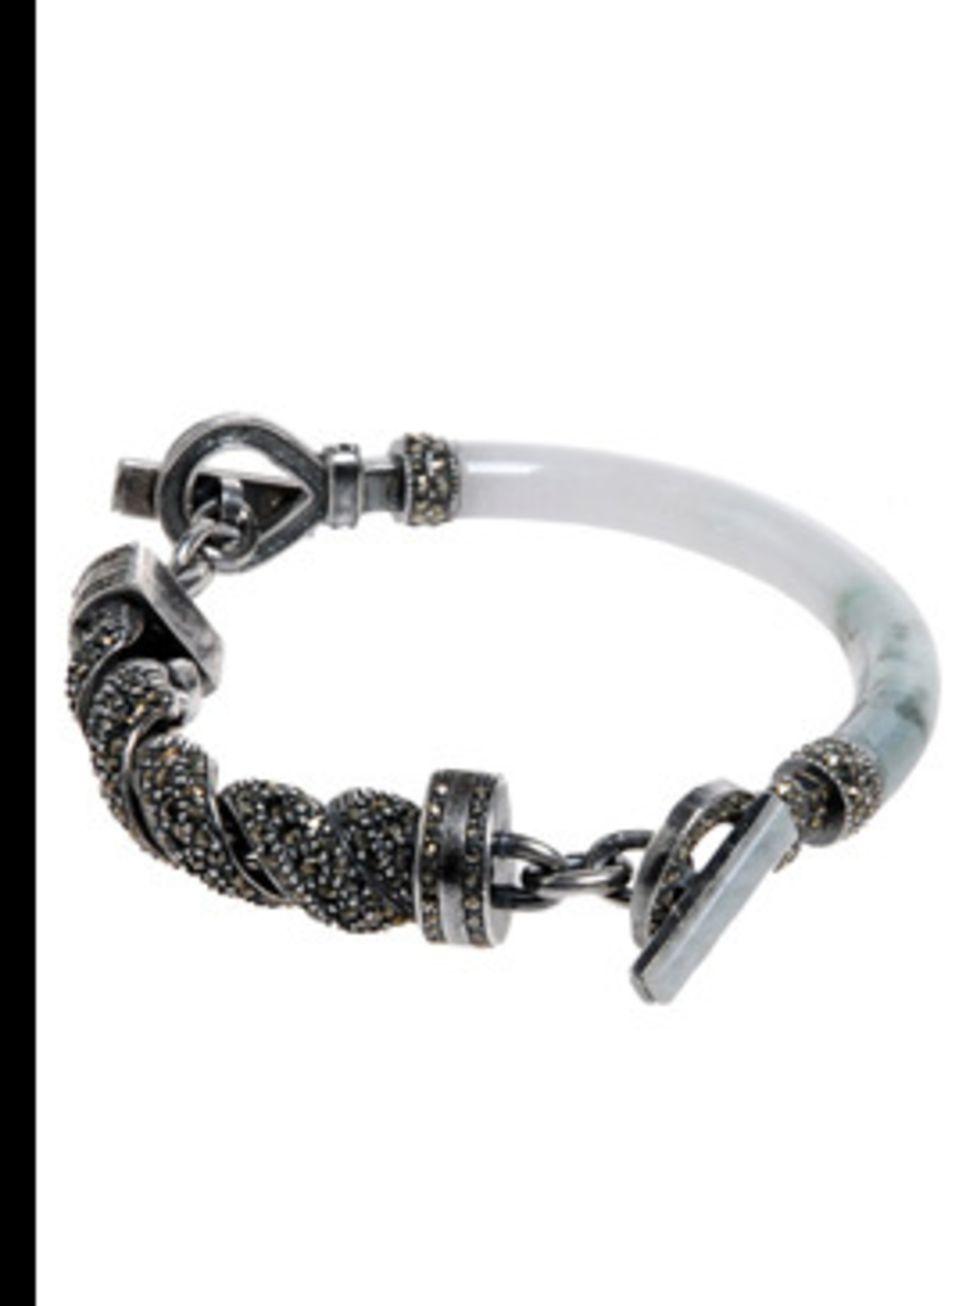 <p>Bracelet, £225.00 by R Jewellery at <a href="http://www.brownsfashion.com/product/designers/womenscollections/brownsfocus/r/94600.htm">Browns</a></p>